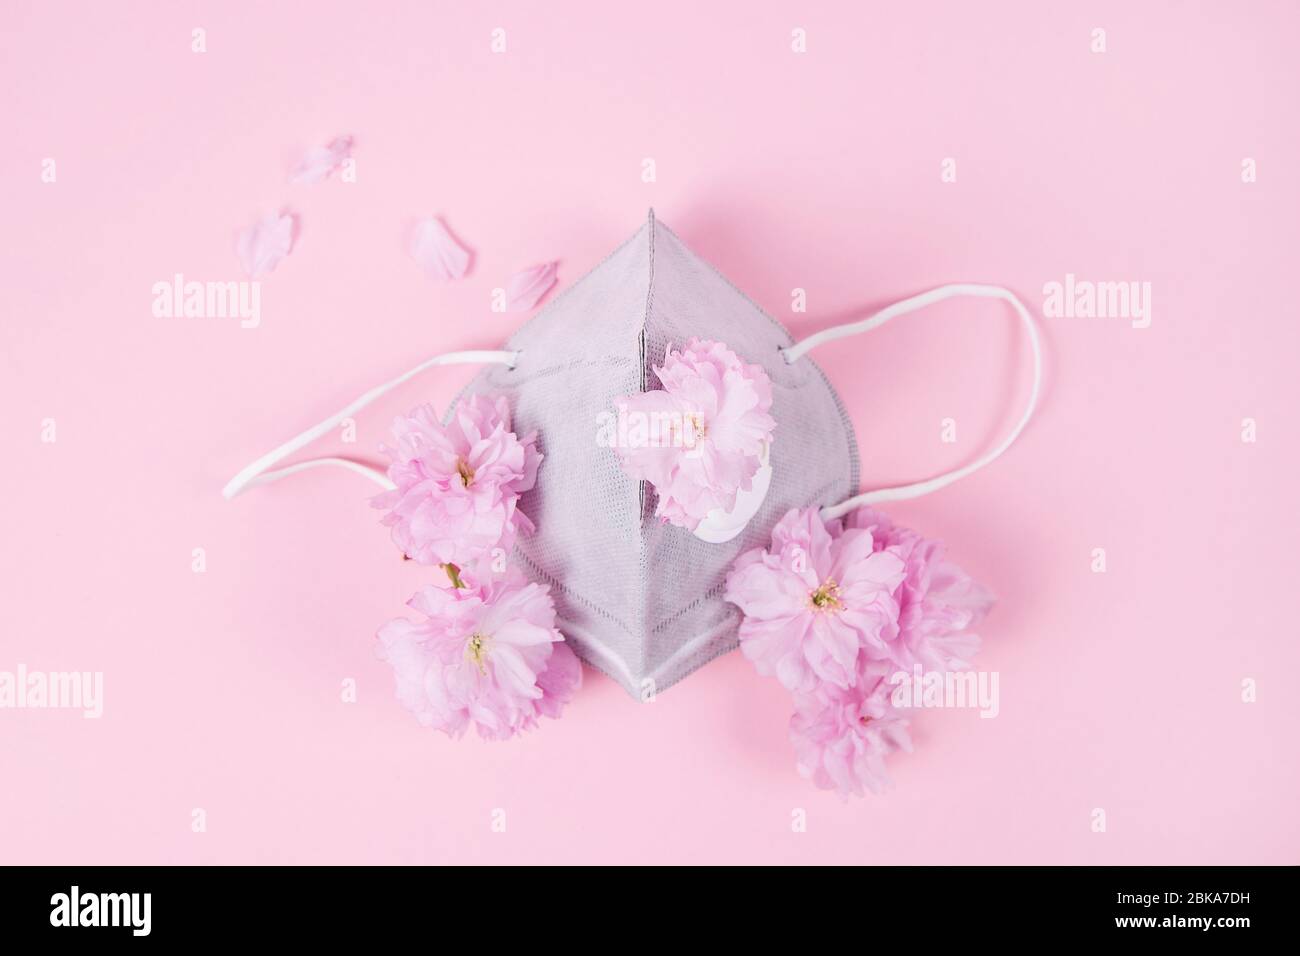 Face mask with sakura flowers on pink background. Dust mask or filtering facepiece respirator - breathing protection against air pollution or flu or v Stock Photo